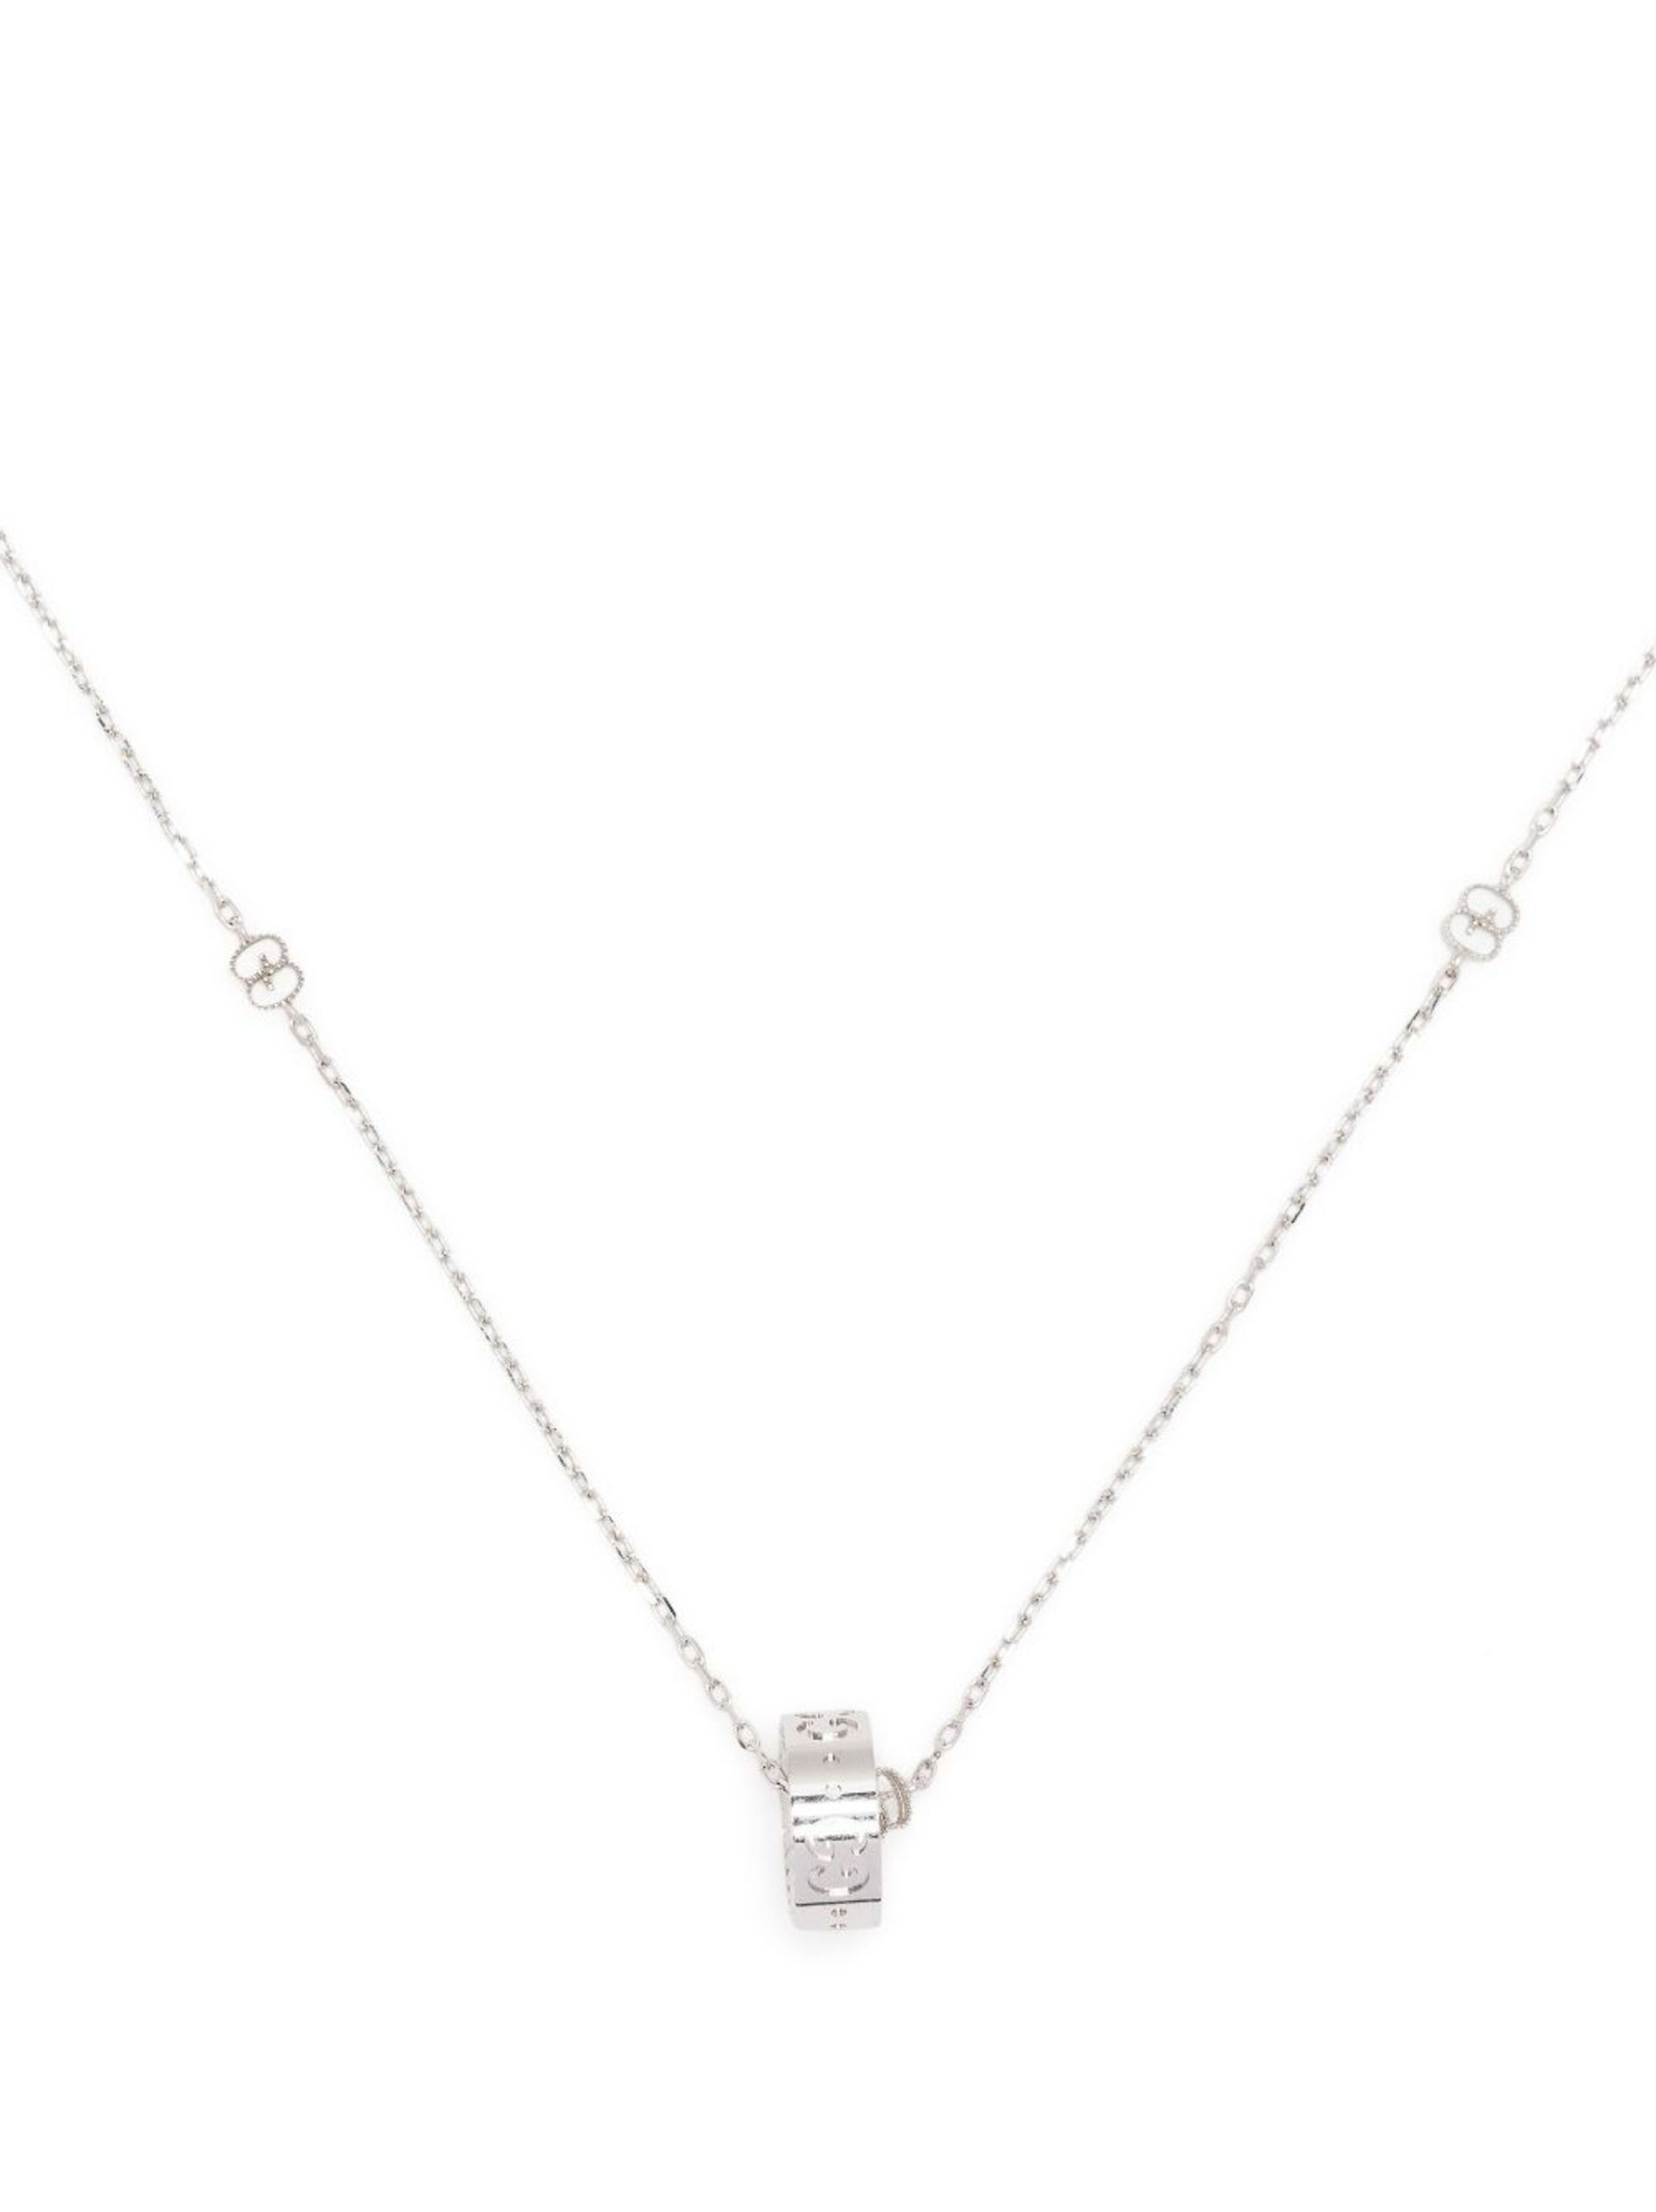 18k white gold Icon charm necklace - 1